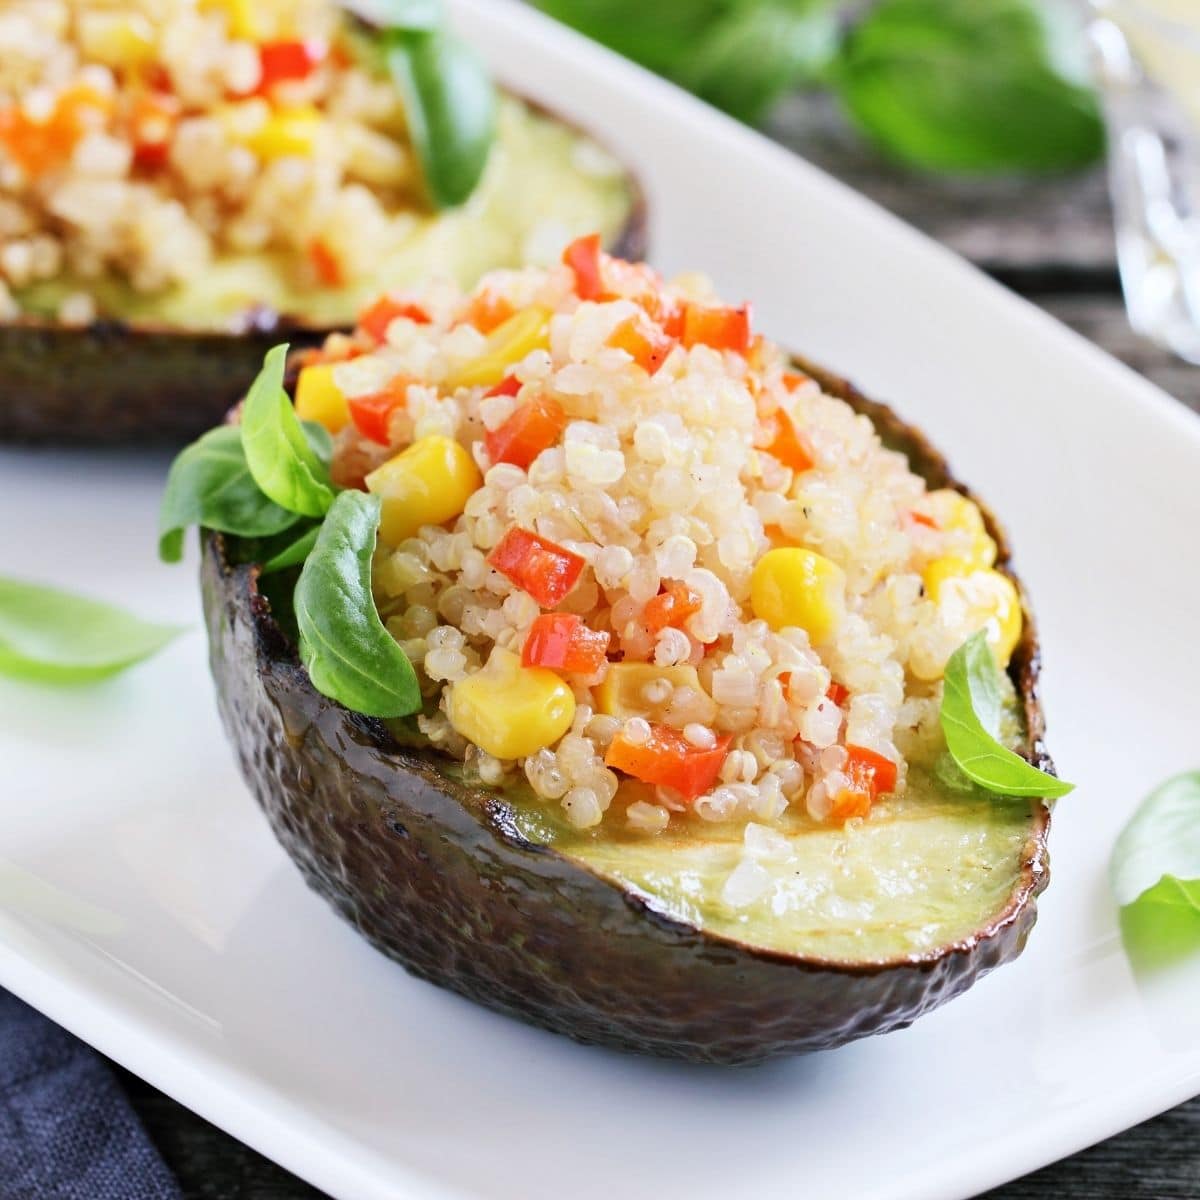 Grilled avocado stuffed with quinoa, corn, and tomatoes